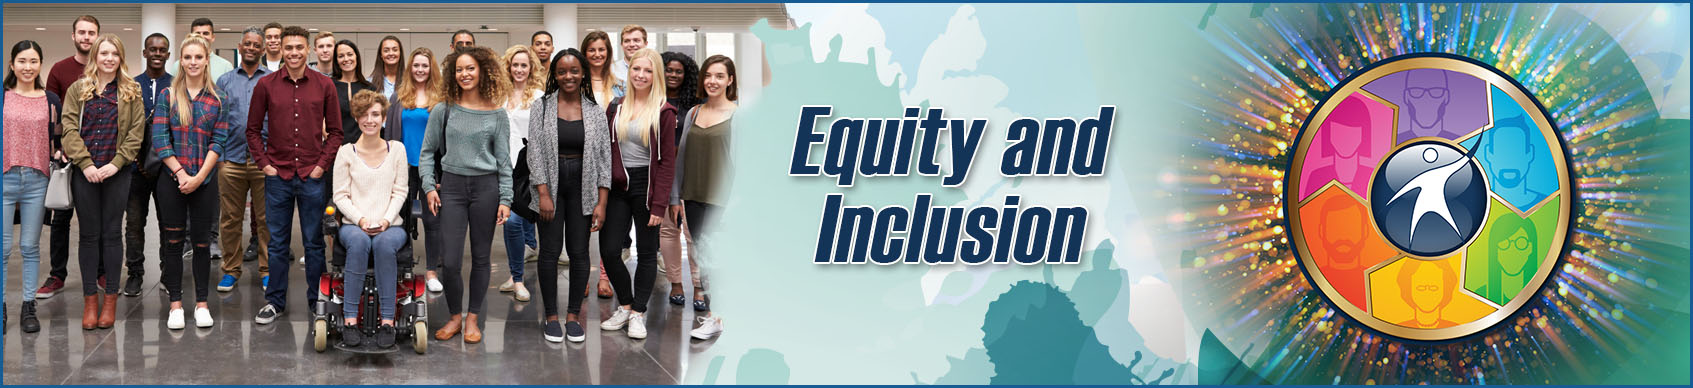 Equity and inclusion video banner - Graphic composite with OTAN logo and students, accessibility and diversity